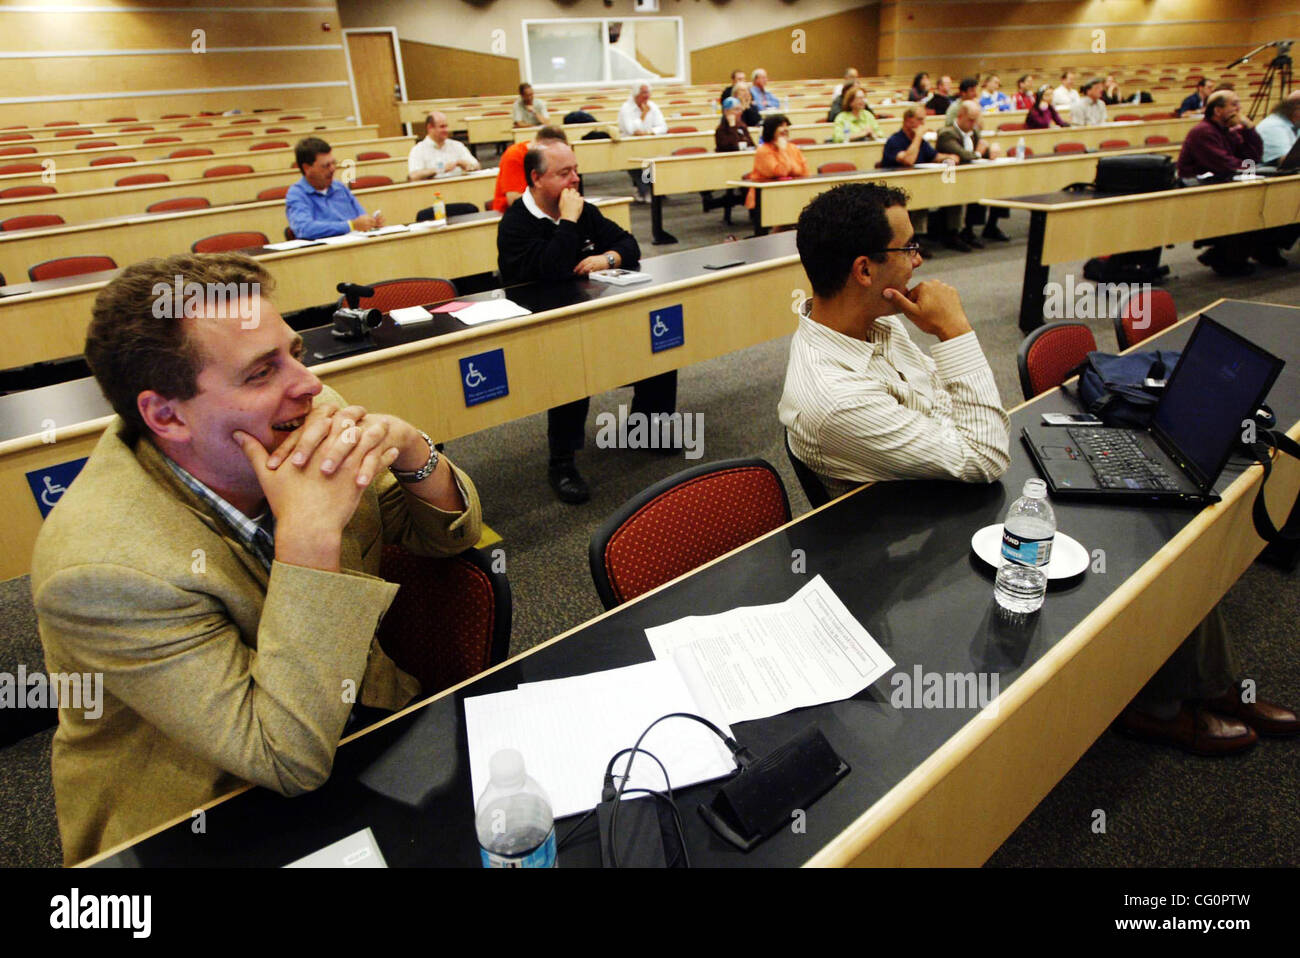 Ben Alamar of Menolo College (left) listens to a panel discuss baseball statistics during a symposium at Cal State University East Bay on Wednesday, July 11, 2007, in Hayward, Calif. (Jane Tyska/The Daily Review) Stock Photo